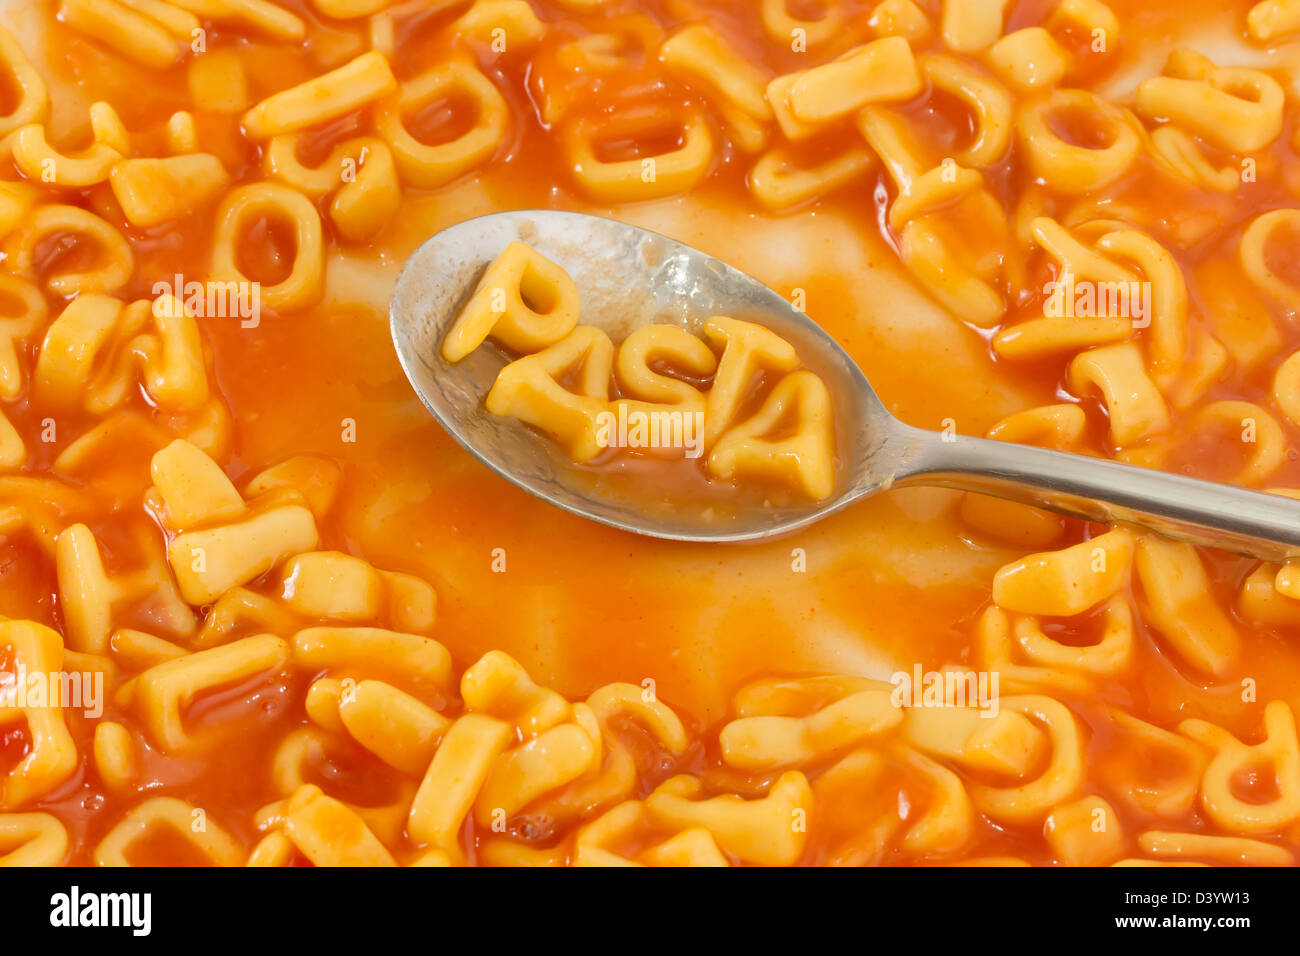 Pasta shaped letters spelling the word PASTA on a spoon within pasta shaped letters in tomato sauce Stock Photo